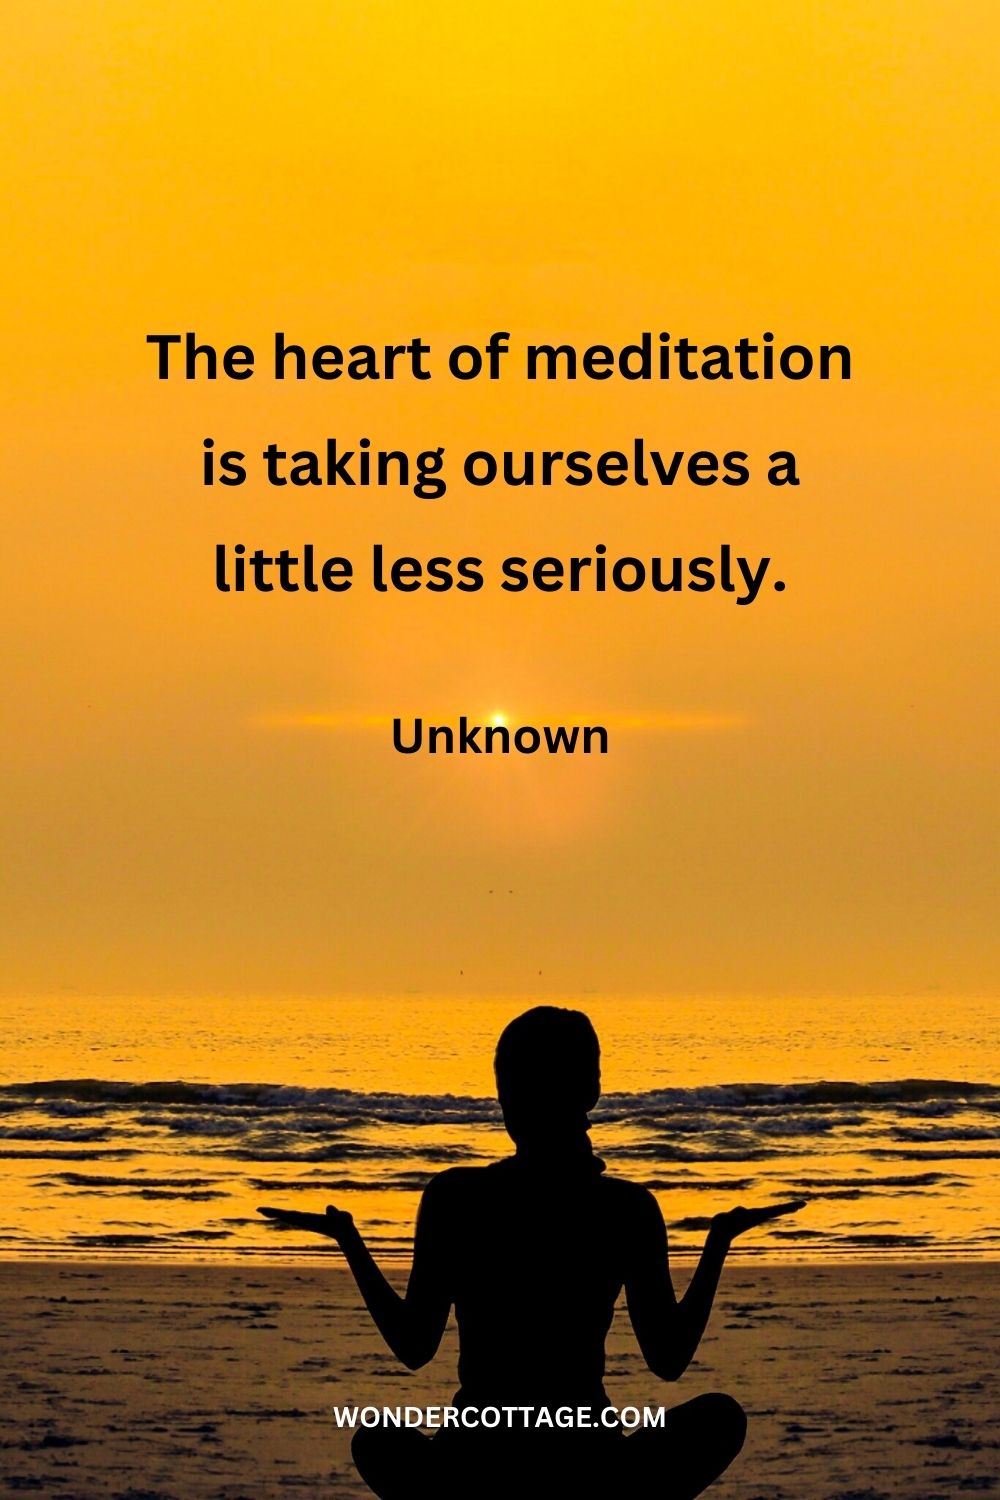 The heart of meditation is taking ourselves a little less seriously. Unknown